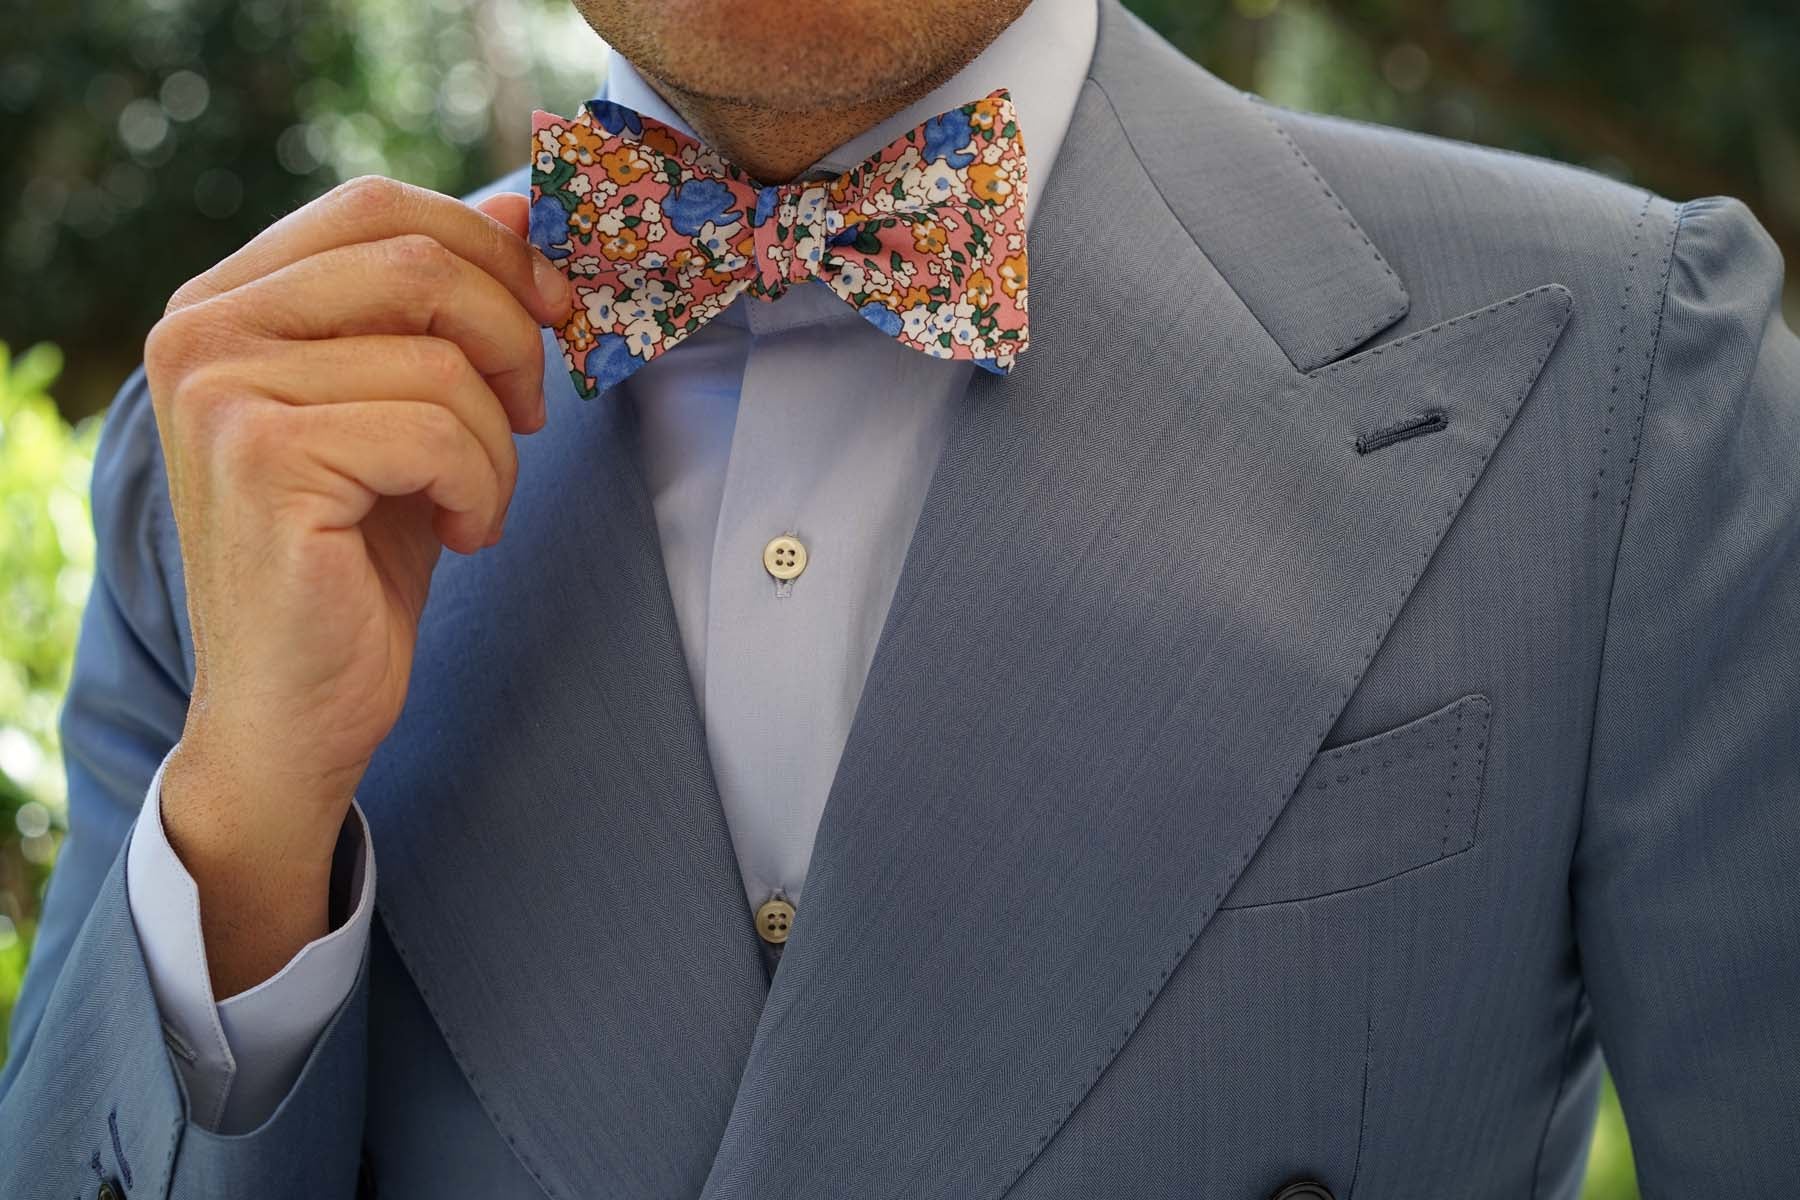 Panama Pink Floral Self Bow Tie | Flower Wedding Untied Bowtie for Men ...